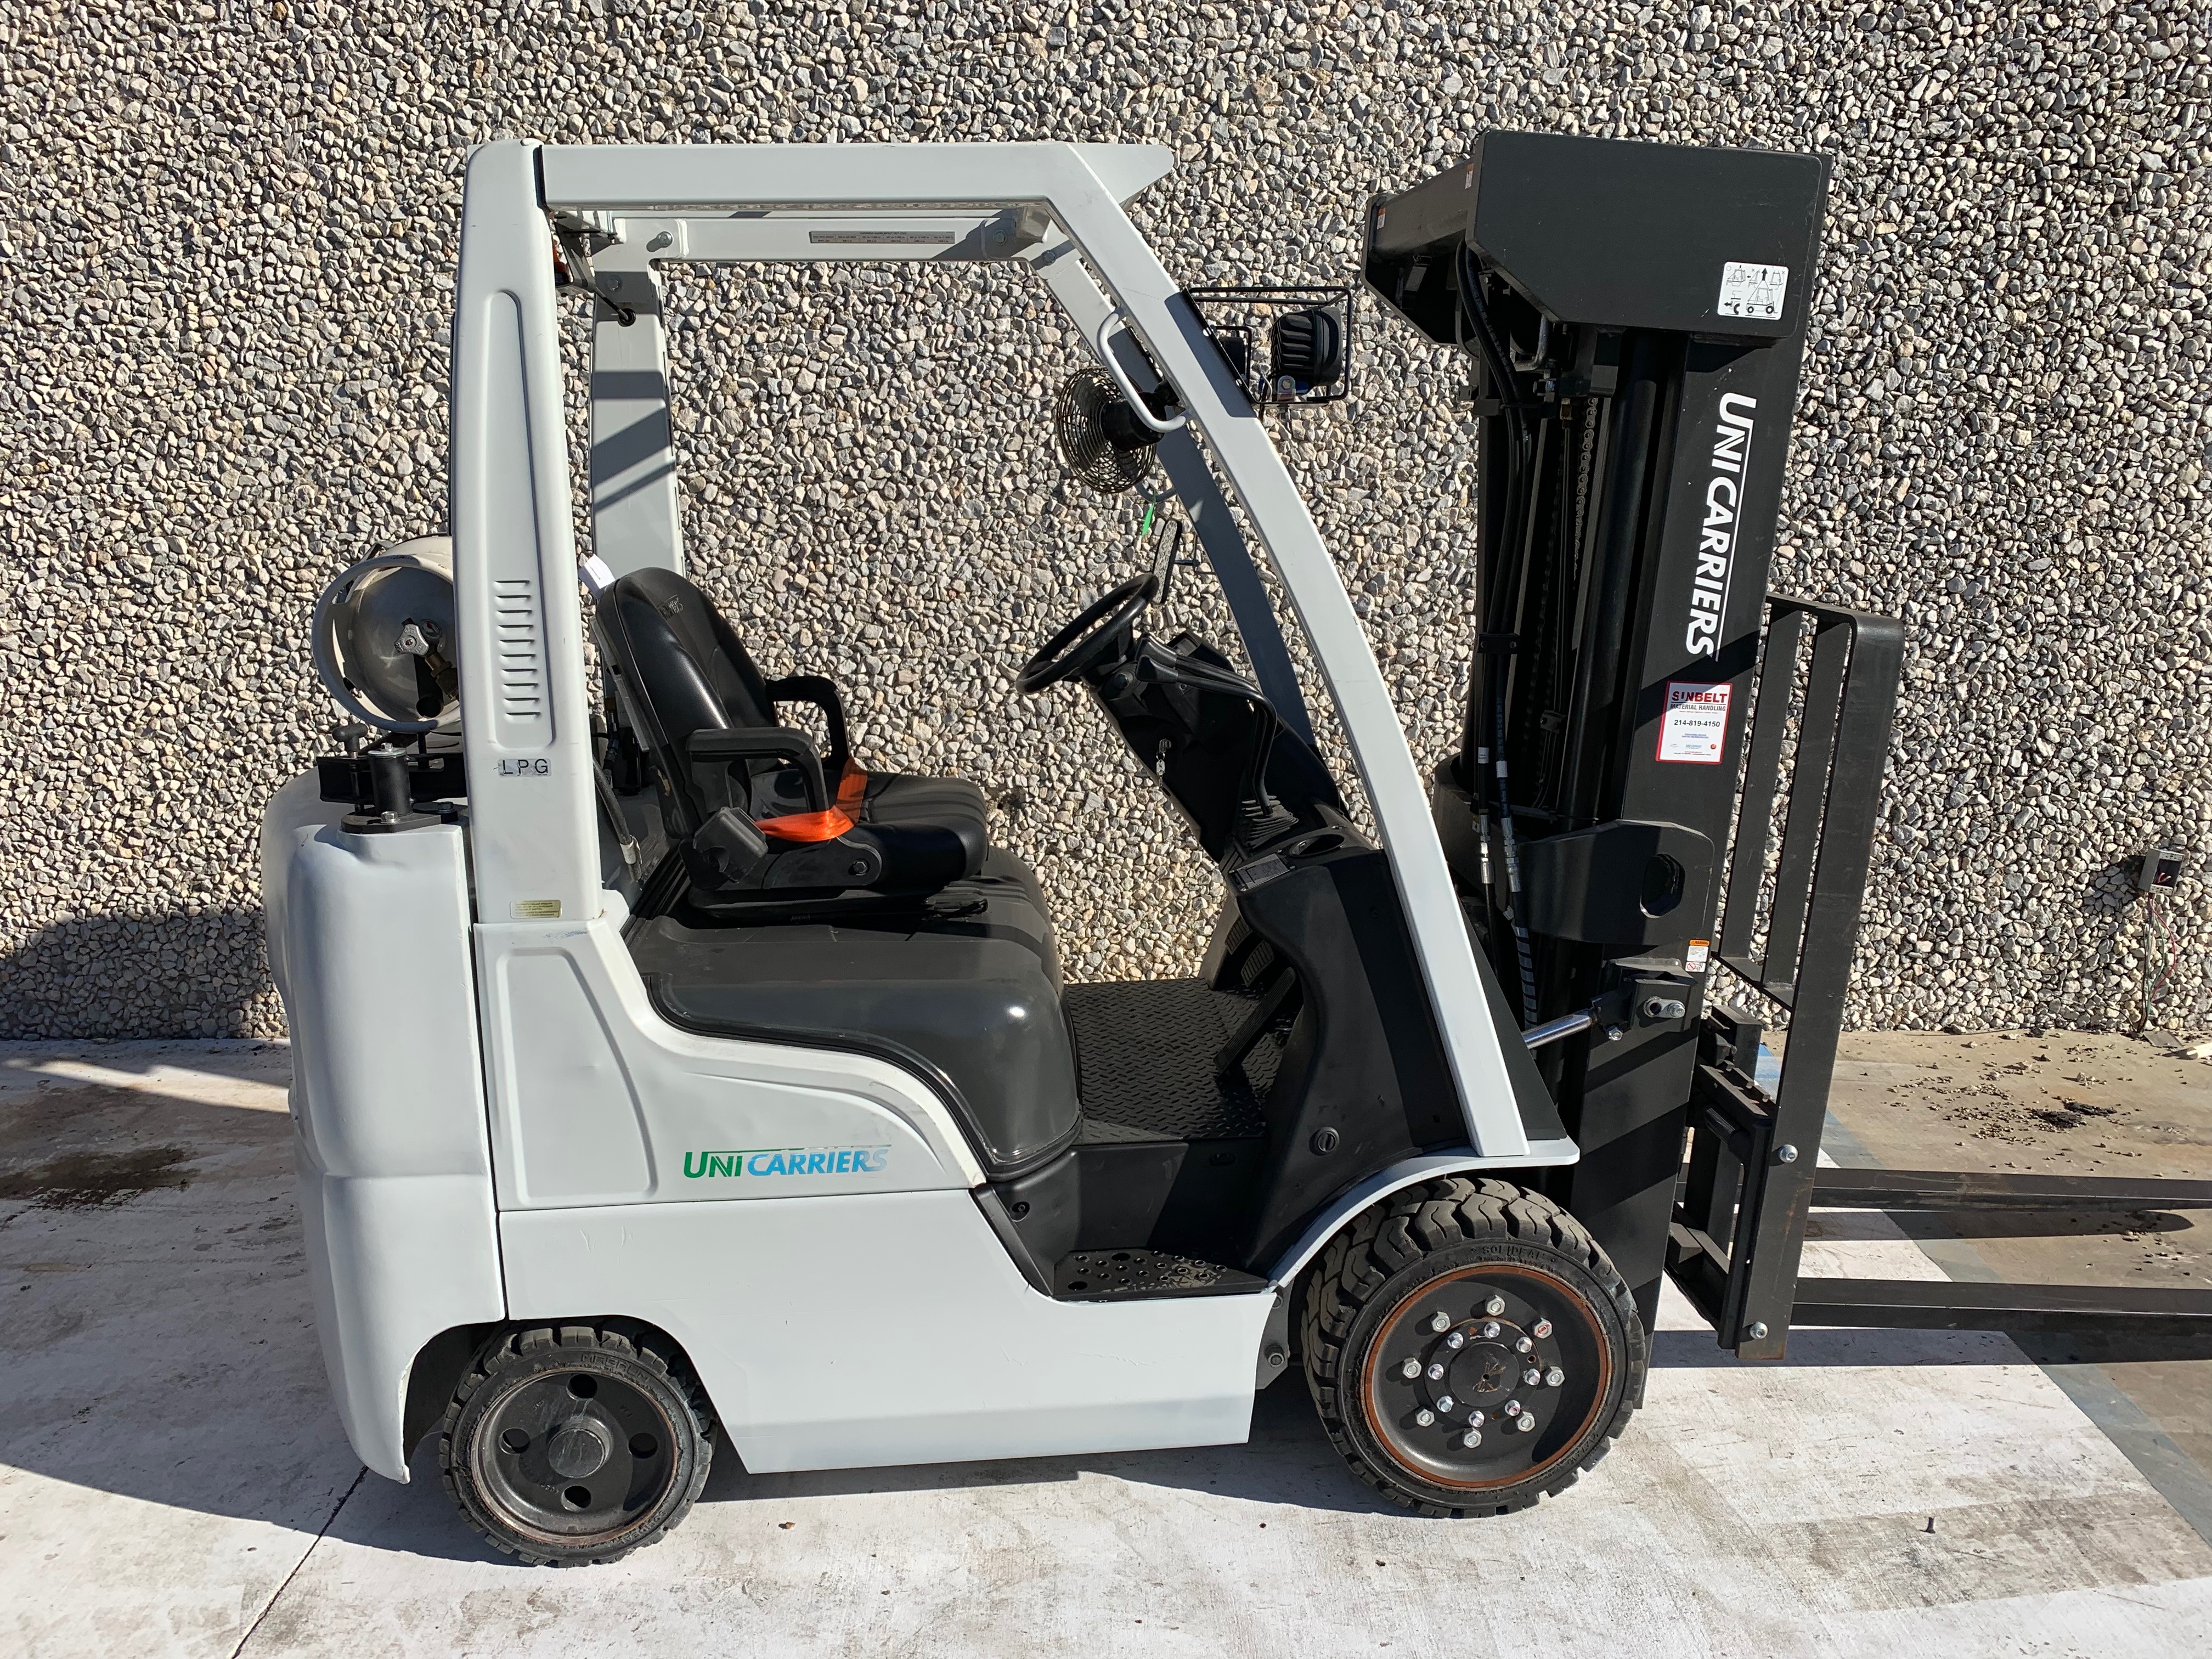 Used Forklift 2016 Unicarriers Cf50lp 21469 Smh